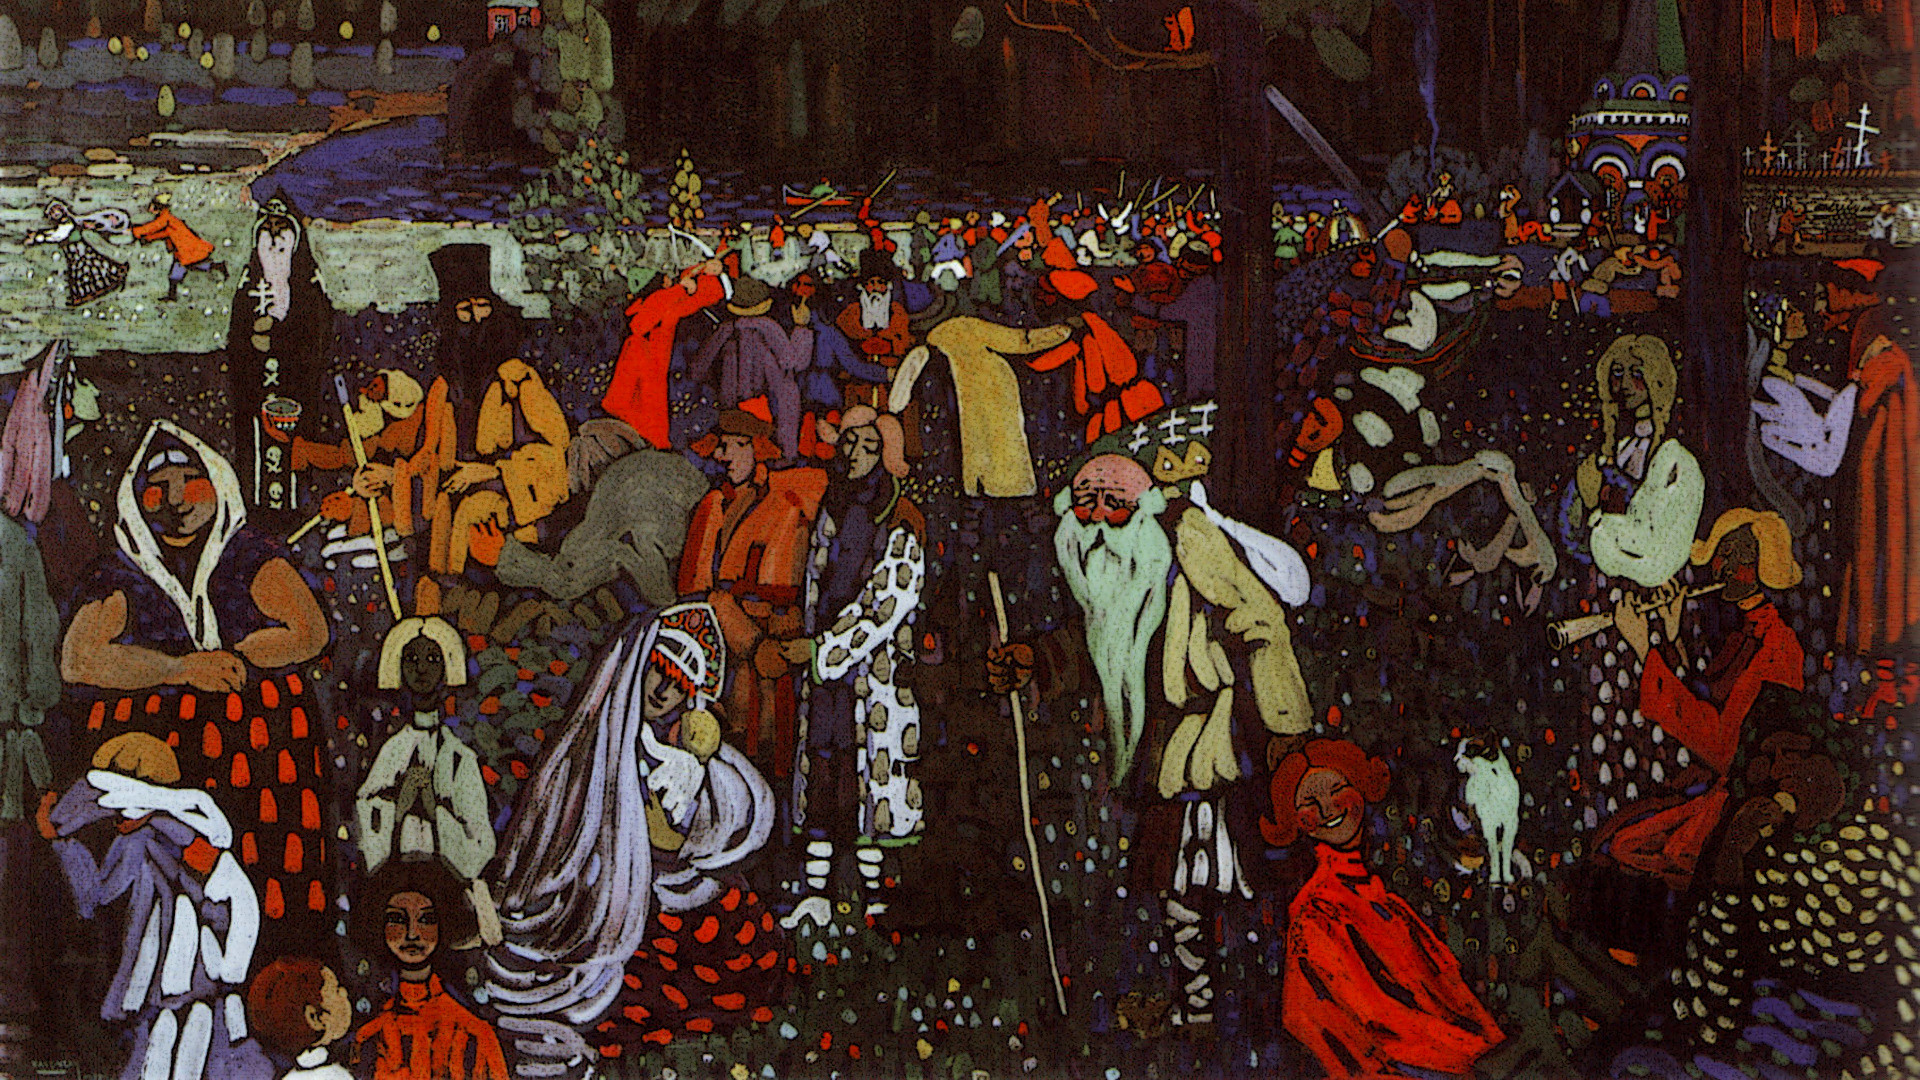 1920x1080 ... Colorful Life” (1907) by Wassily Kandinsky. “